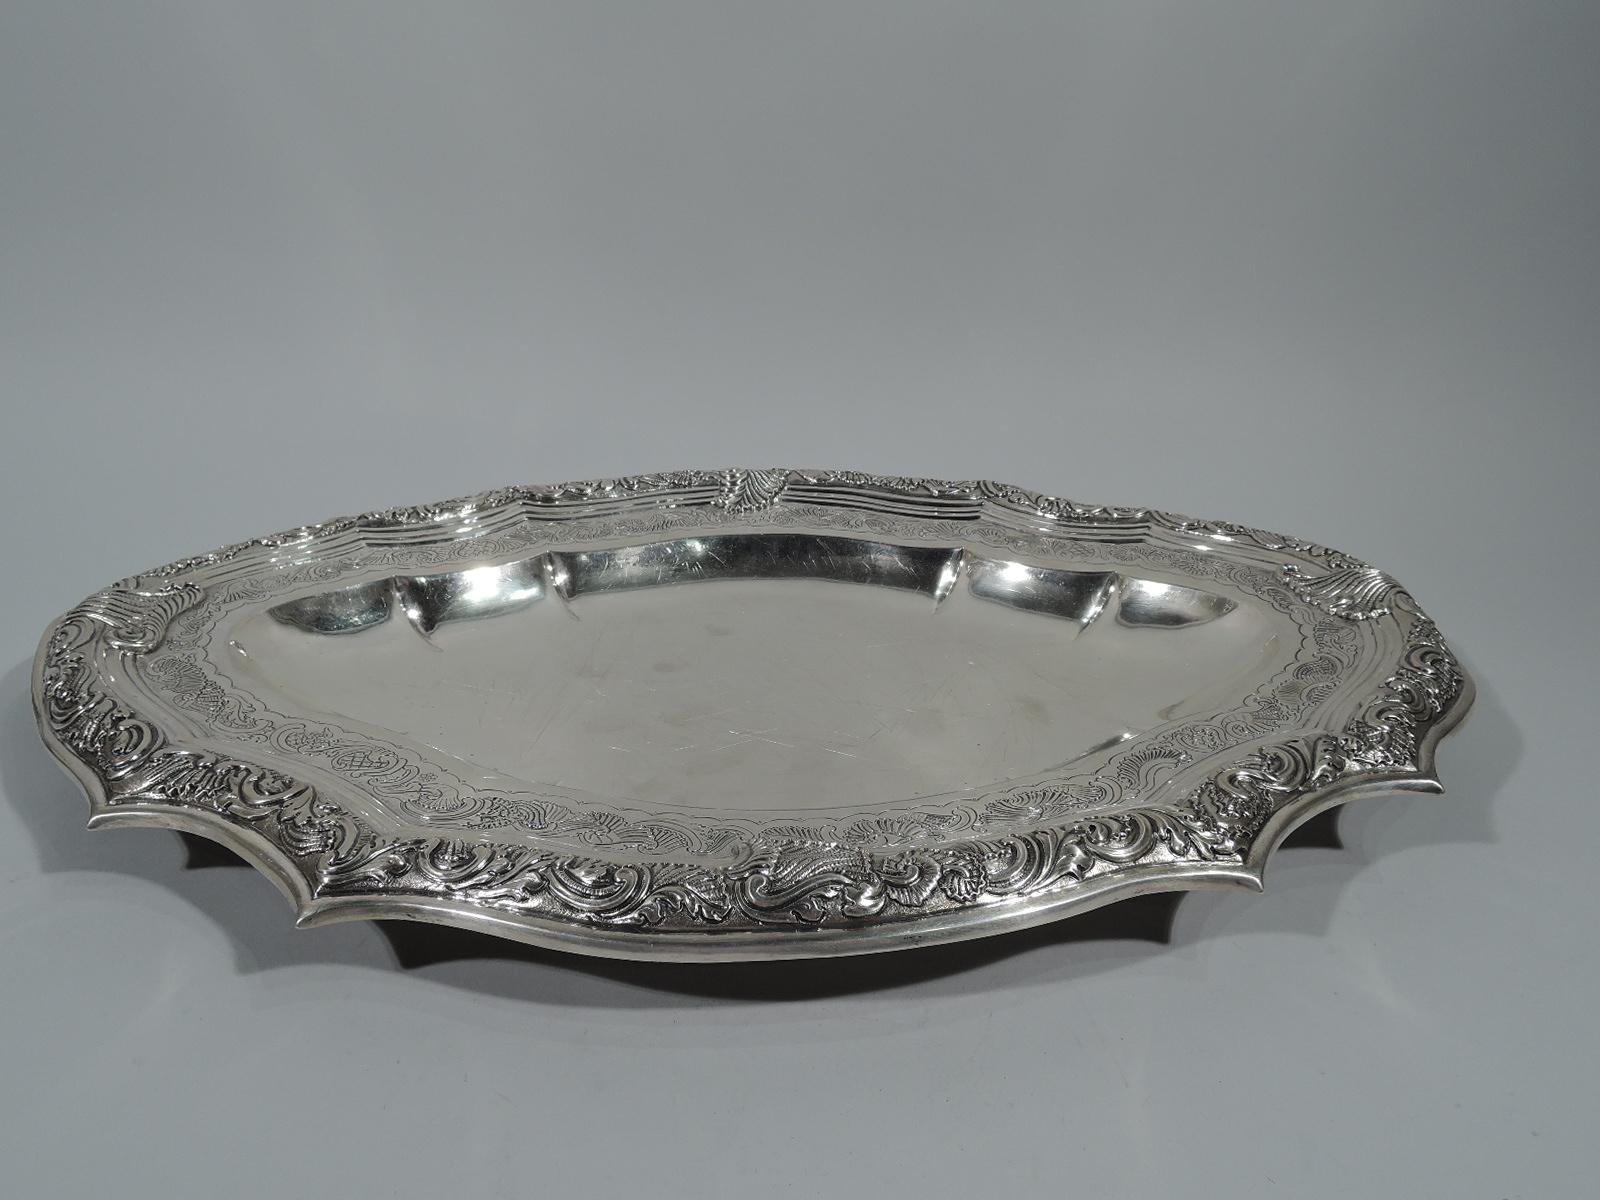 Antique Portuguese silver serving tray, late 18th century. Plain and shaped oval well. Shoulder has chased leafy-scroll-and-shell band between Vitruvian scroll and molded borders. Same embossed on rim with large overlapping shells. Fashionable